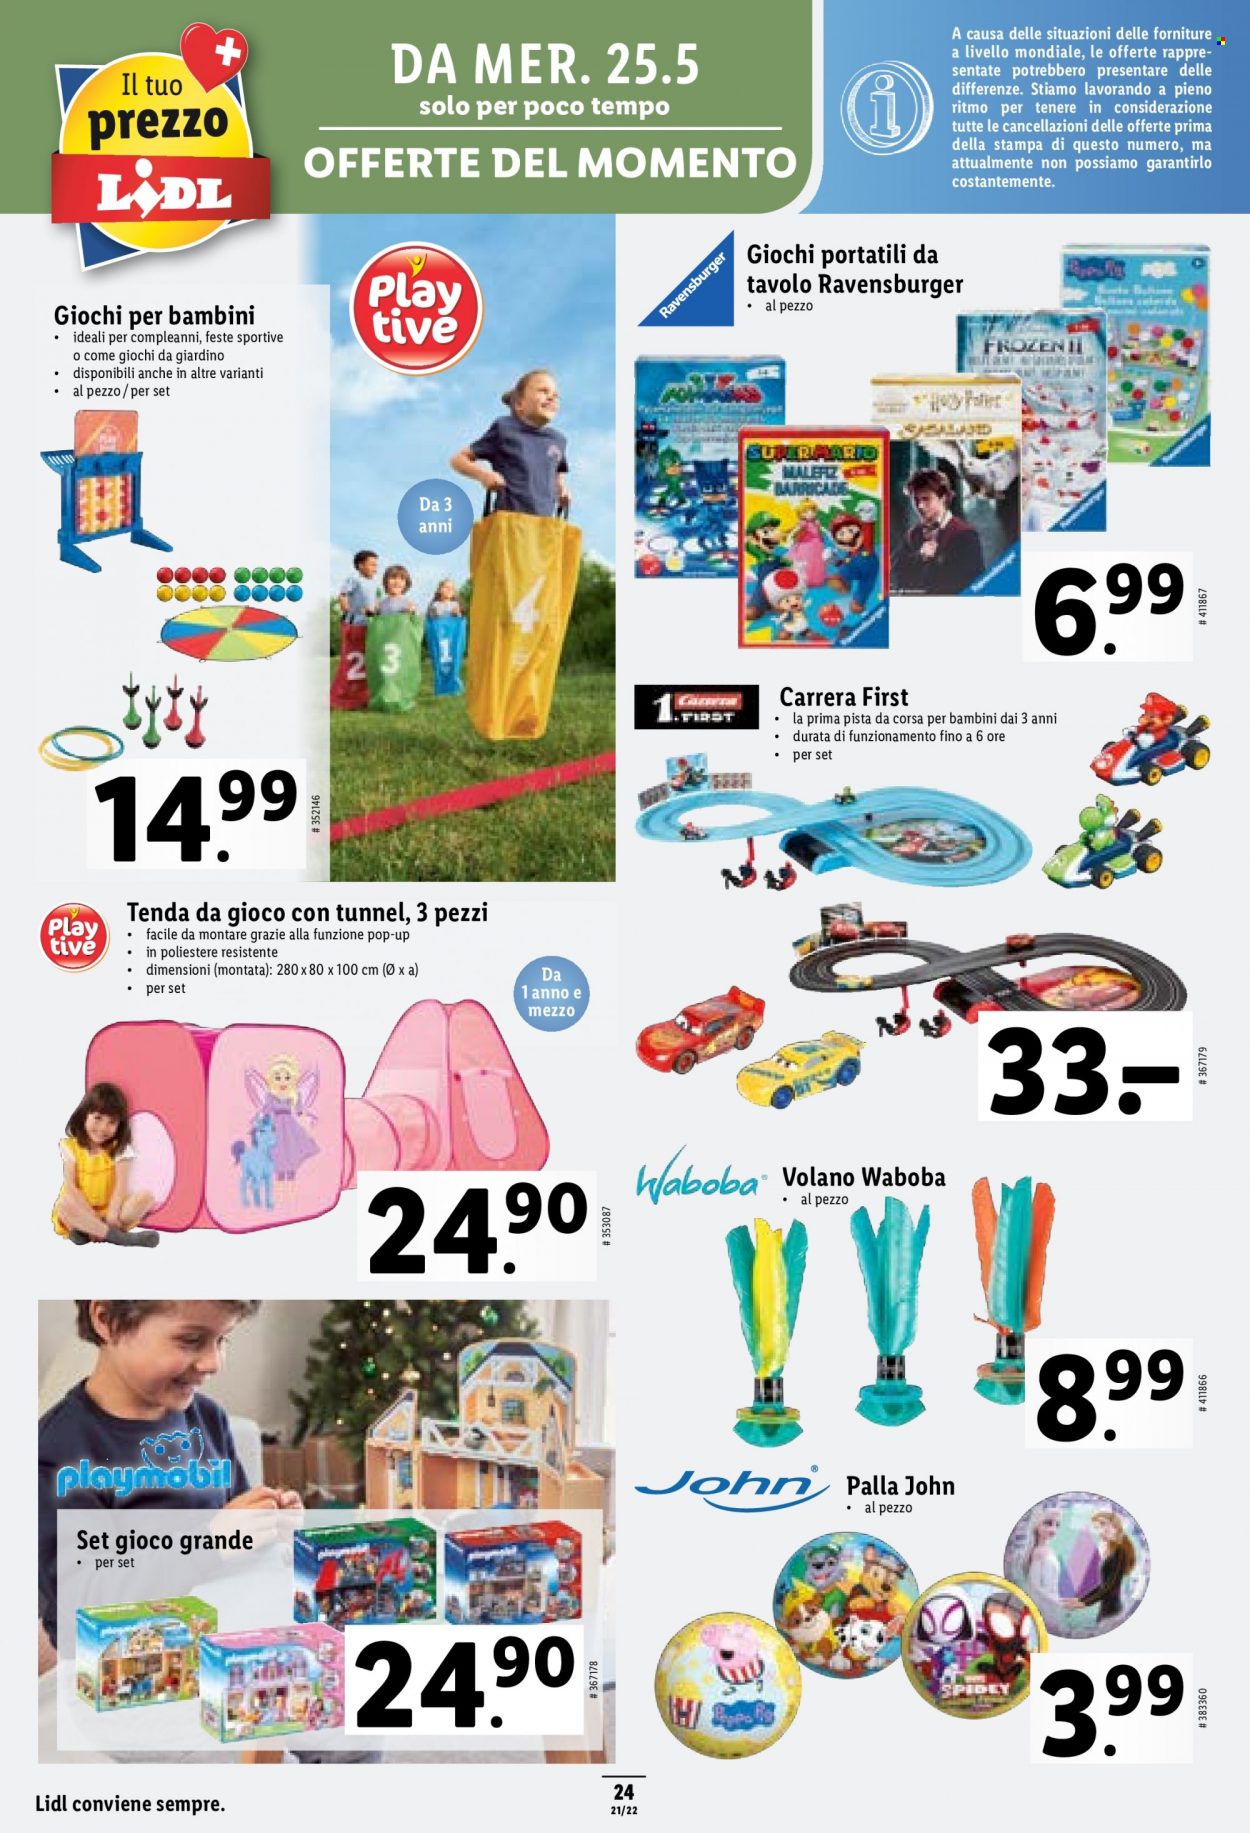 Catalogue Lidl - 25.5.2022 - 1.6.2022. Page 24.